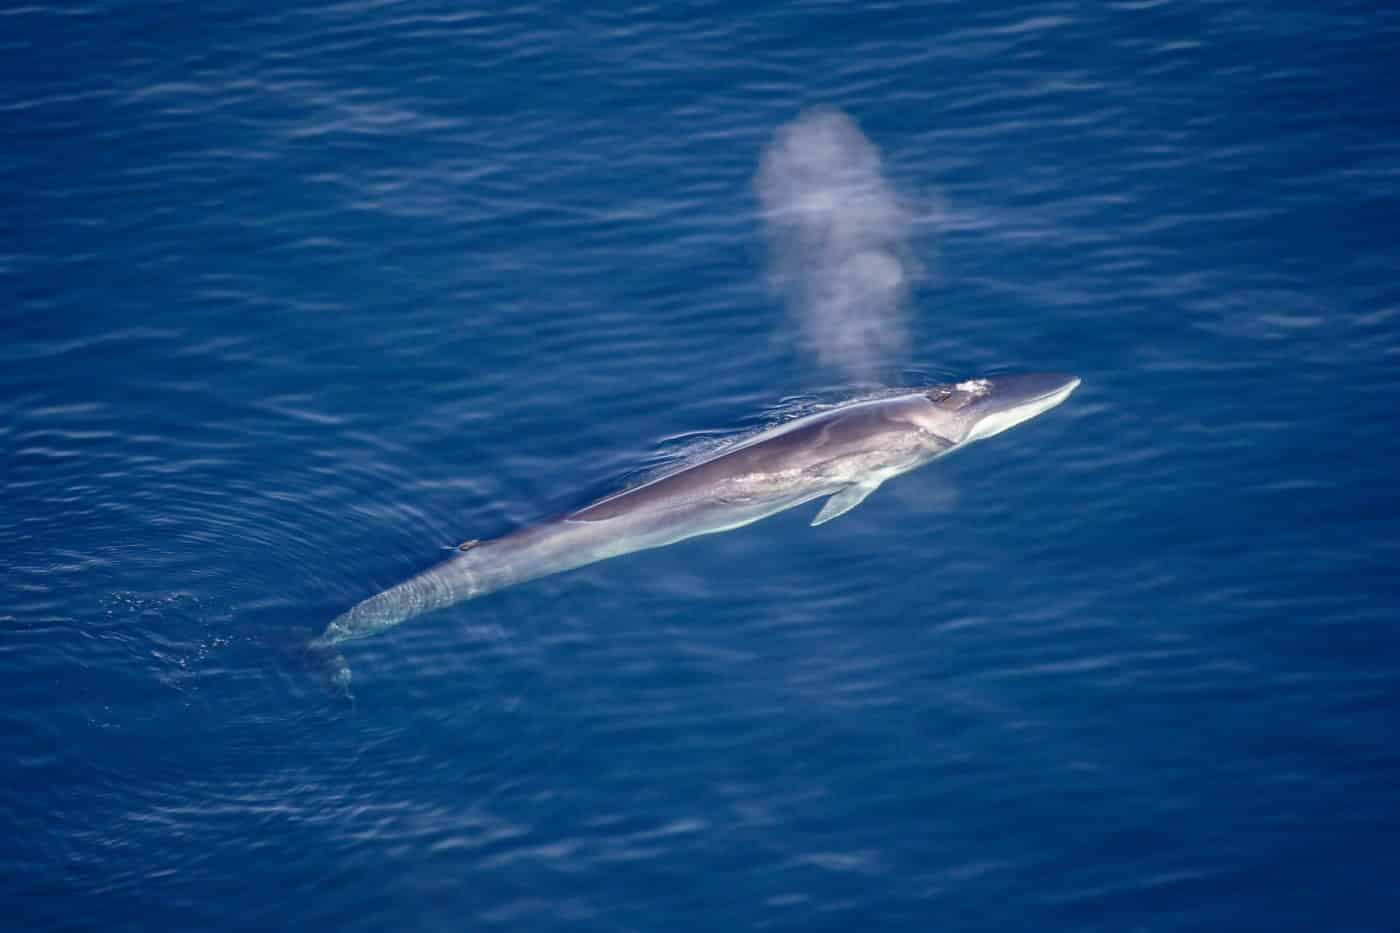 Fin whale breathing. Photo by Aqqa Rosing Asvid.